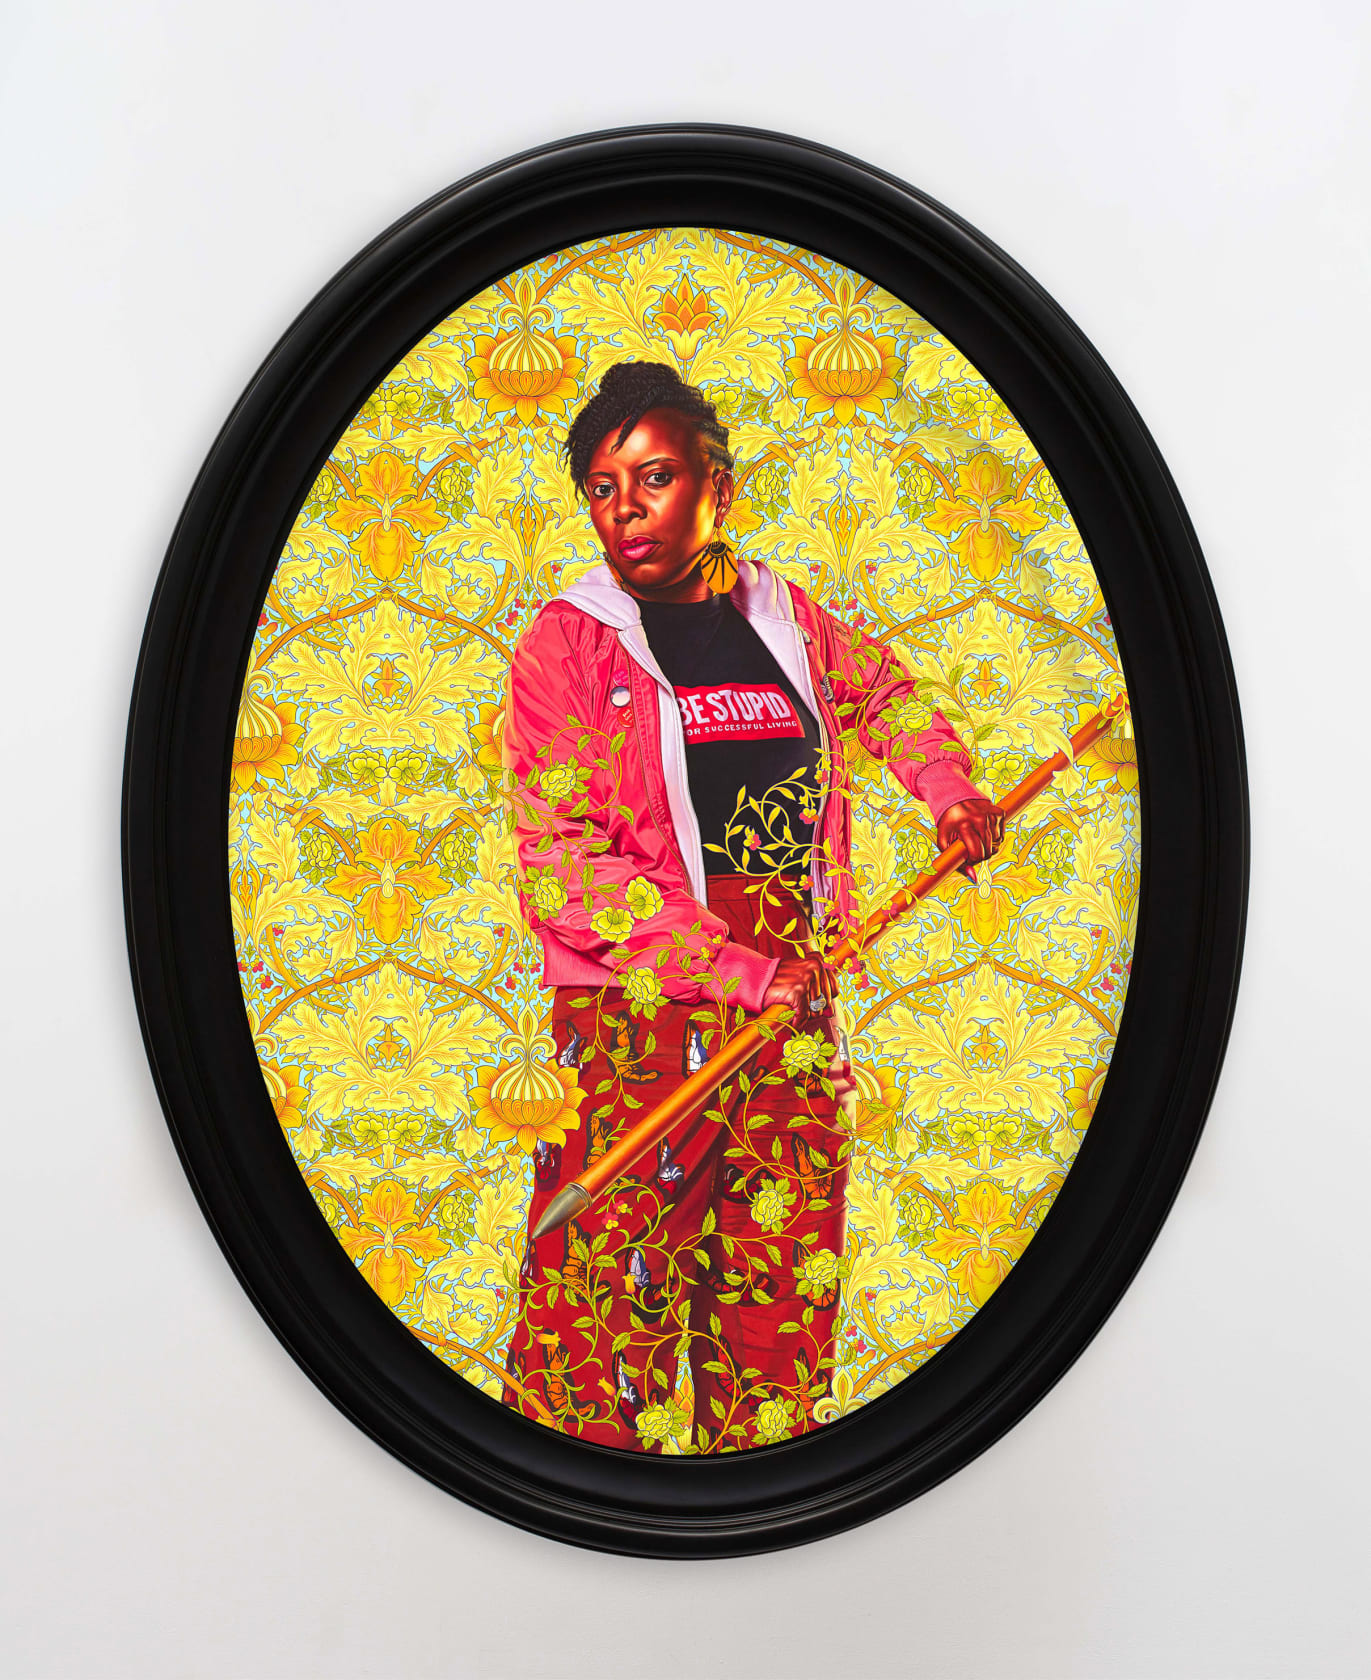 Kehinde Wiley | The Yellow Wallpaper, William Morrison Gallery, London, England February 22 - July 12 2020 | 7